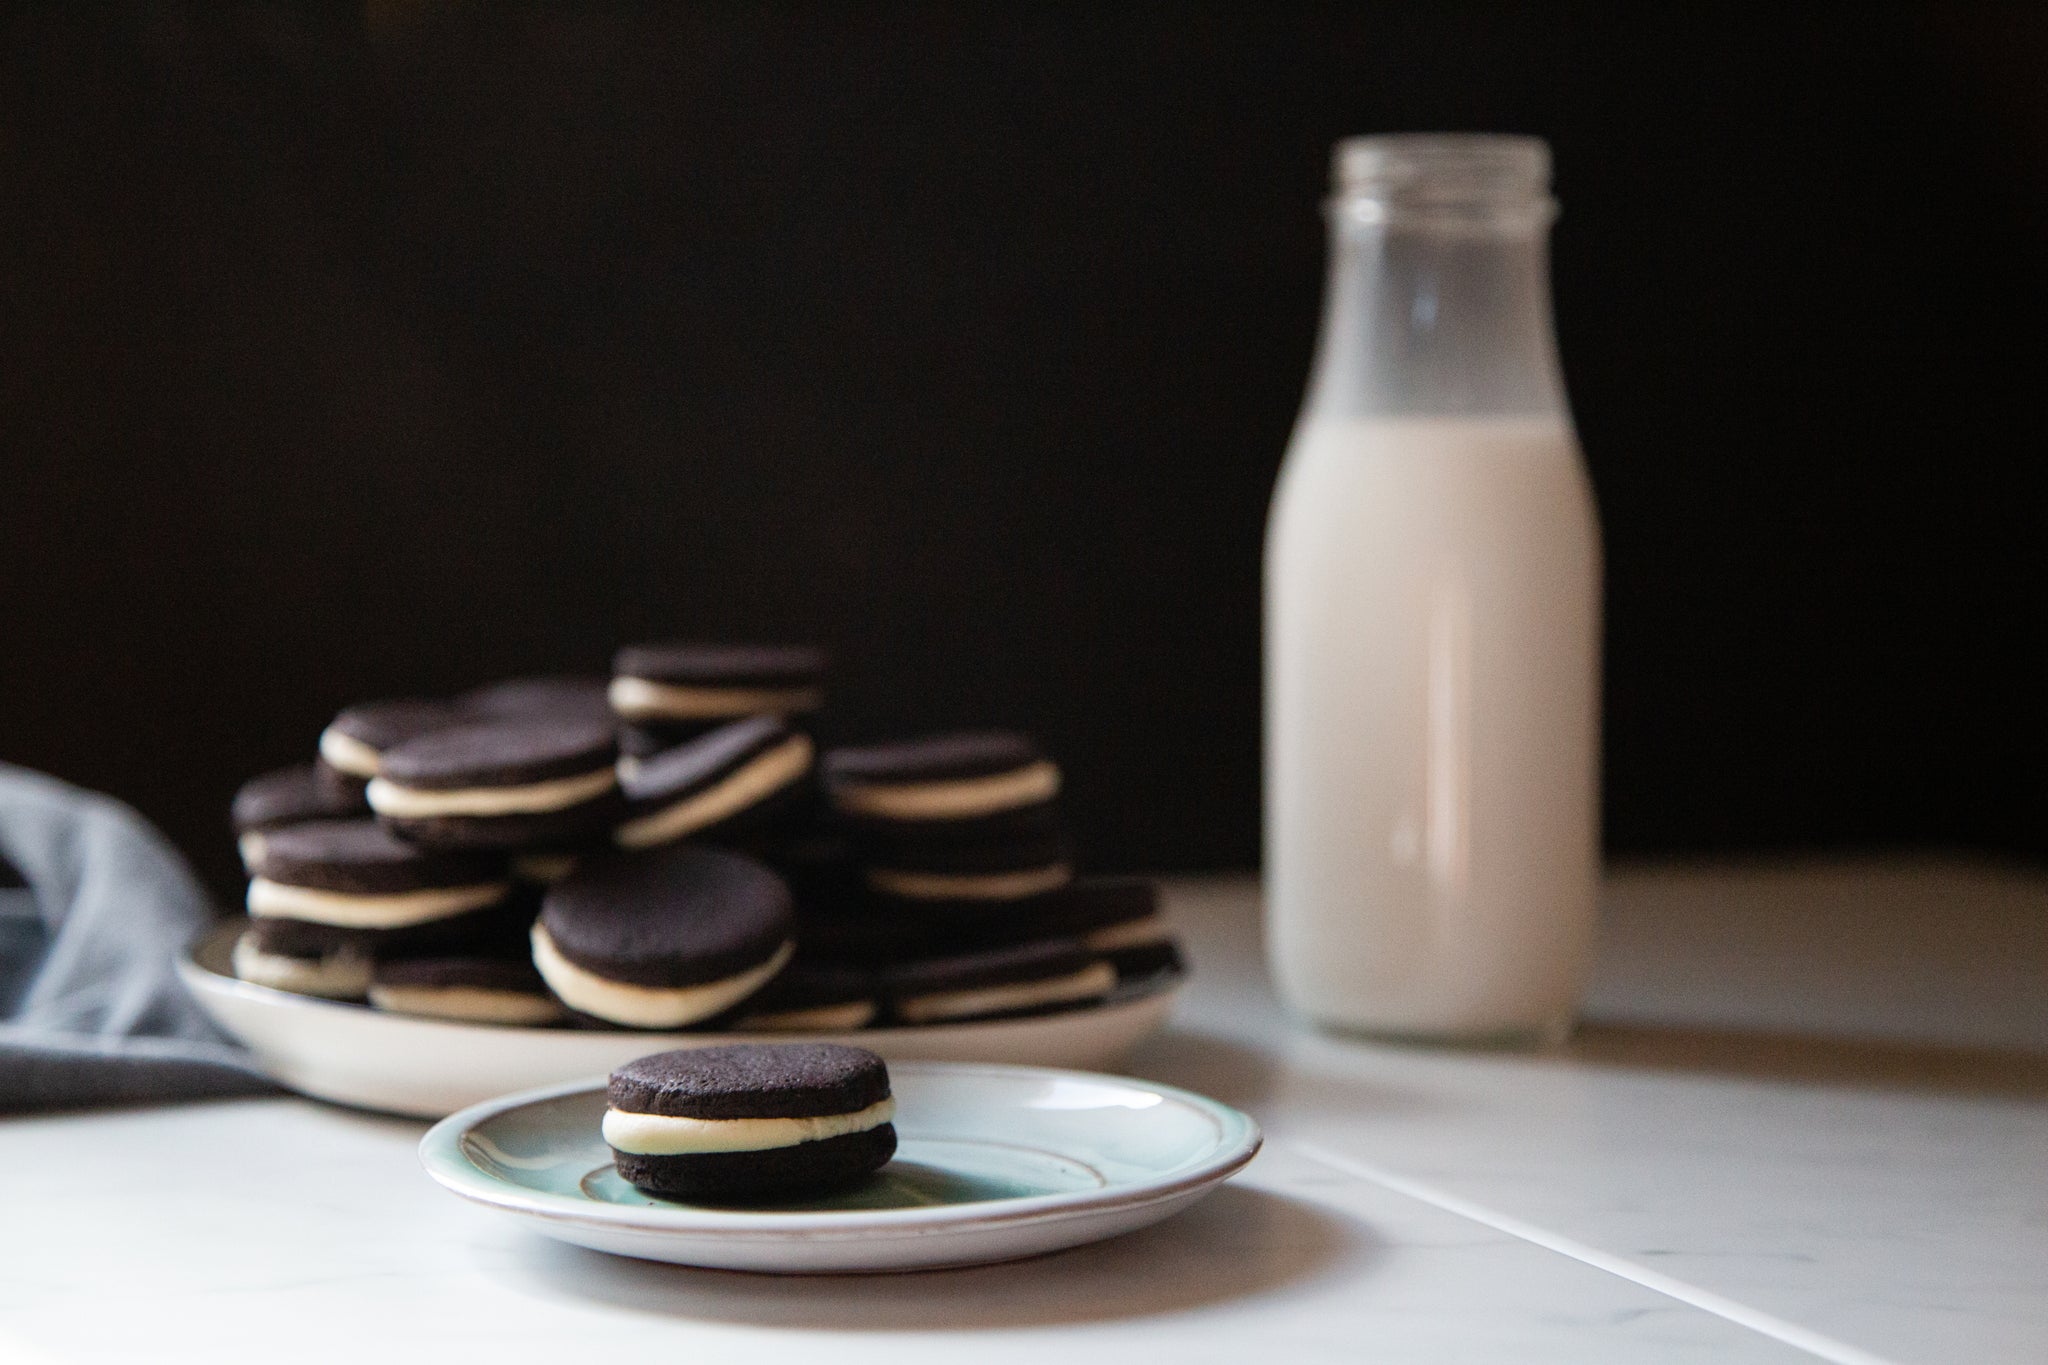 homemade oreo cookies with jar of milk on the side made using black velvet cacao powder by weirdo good